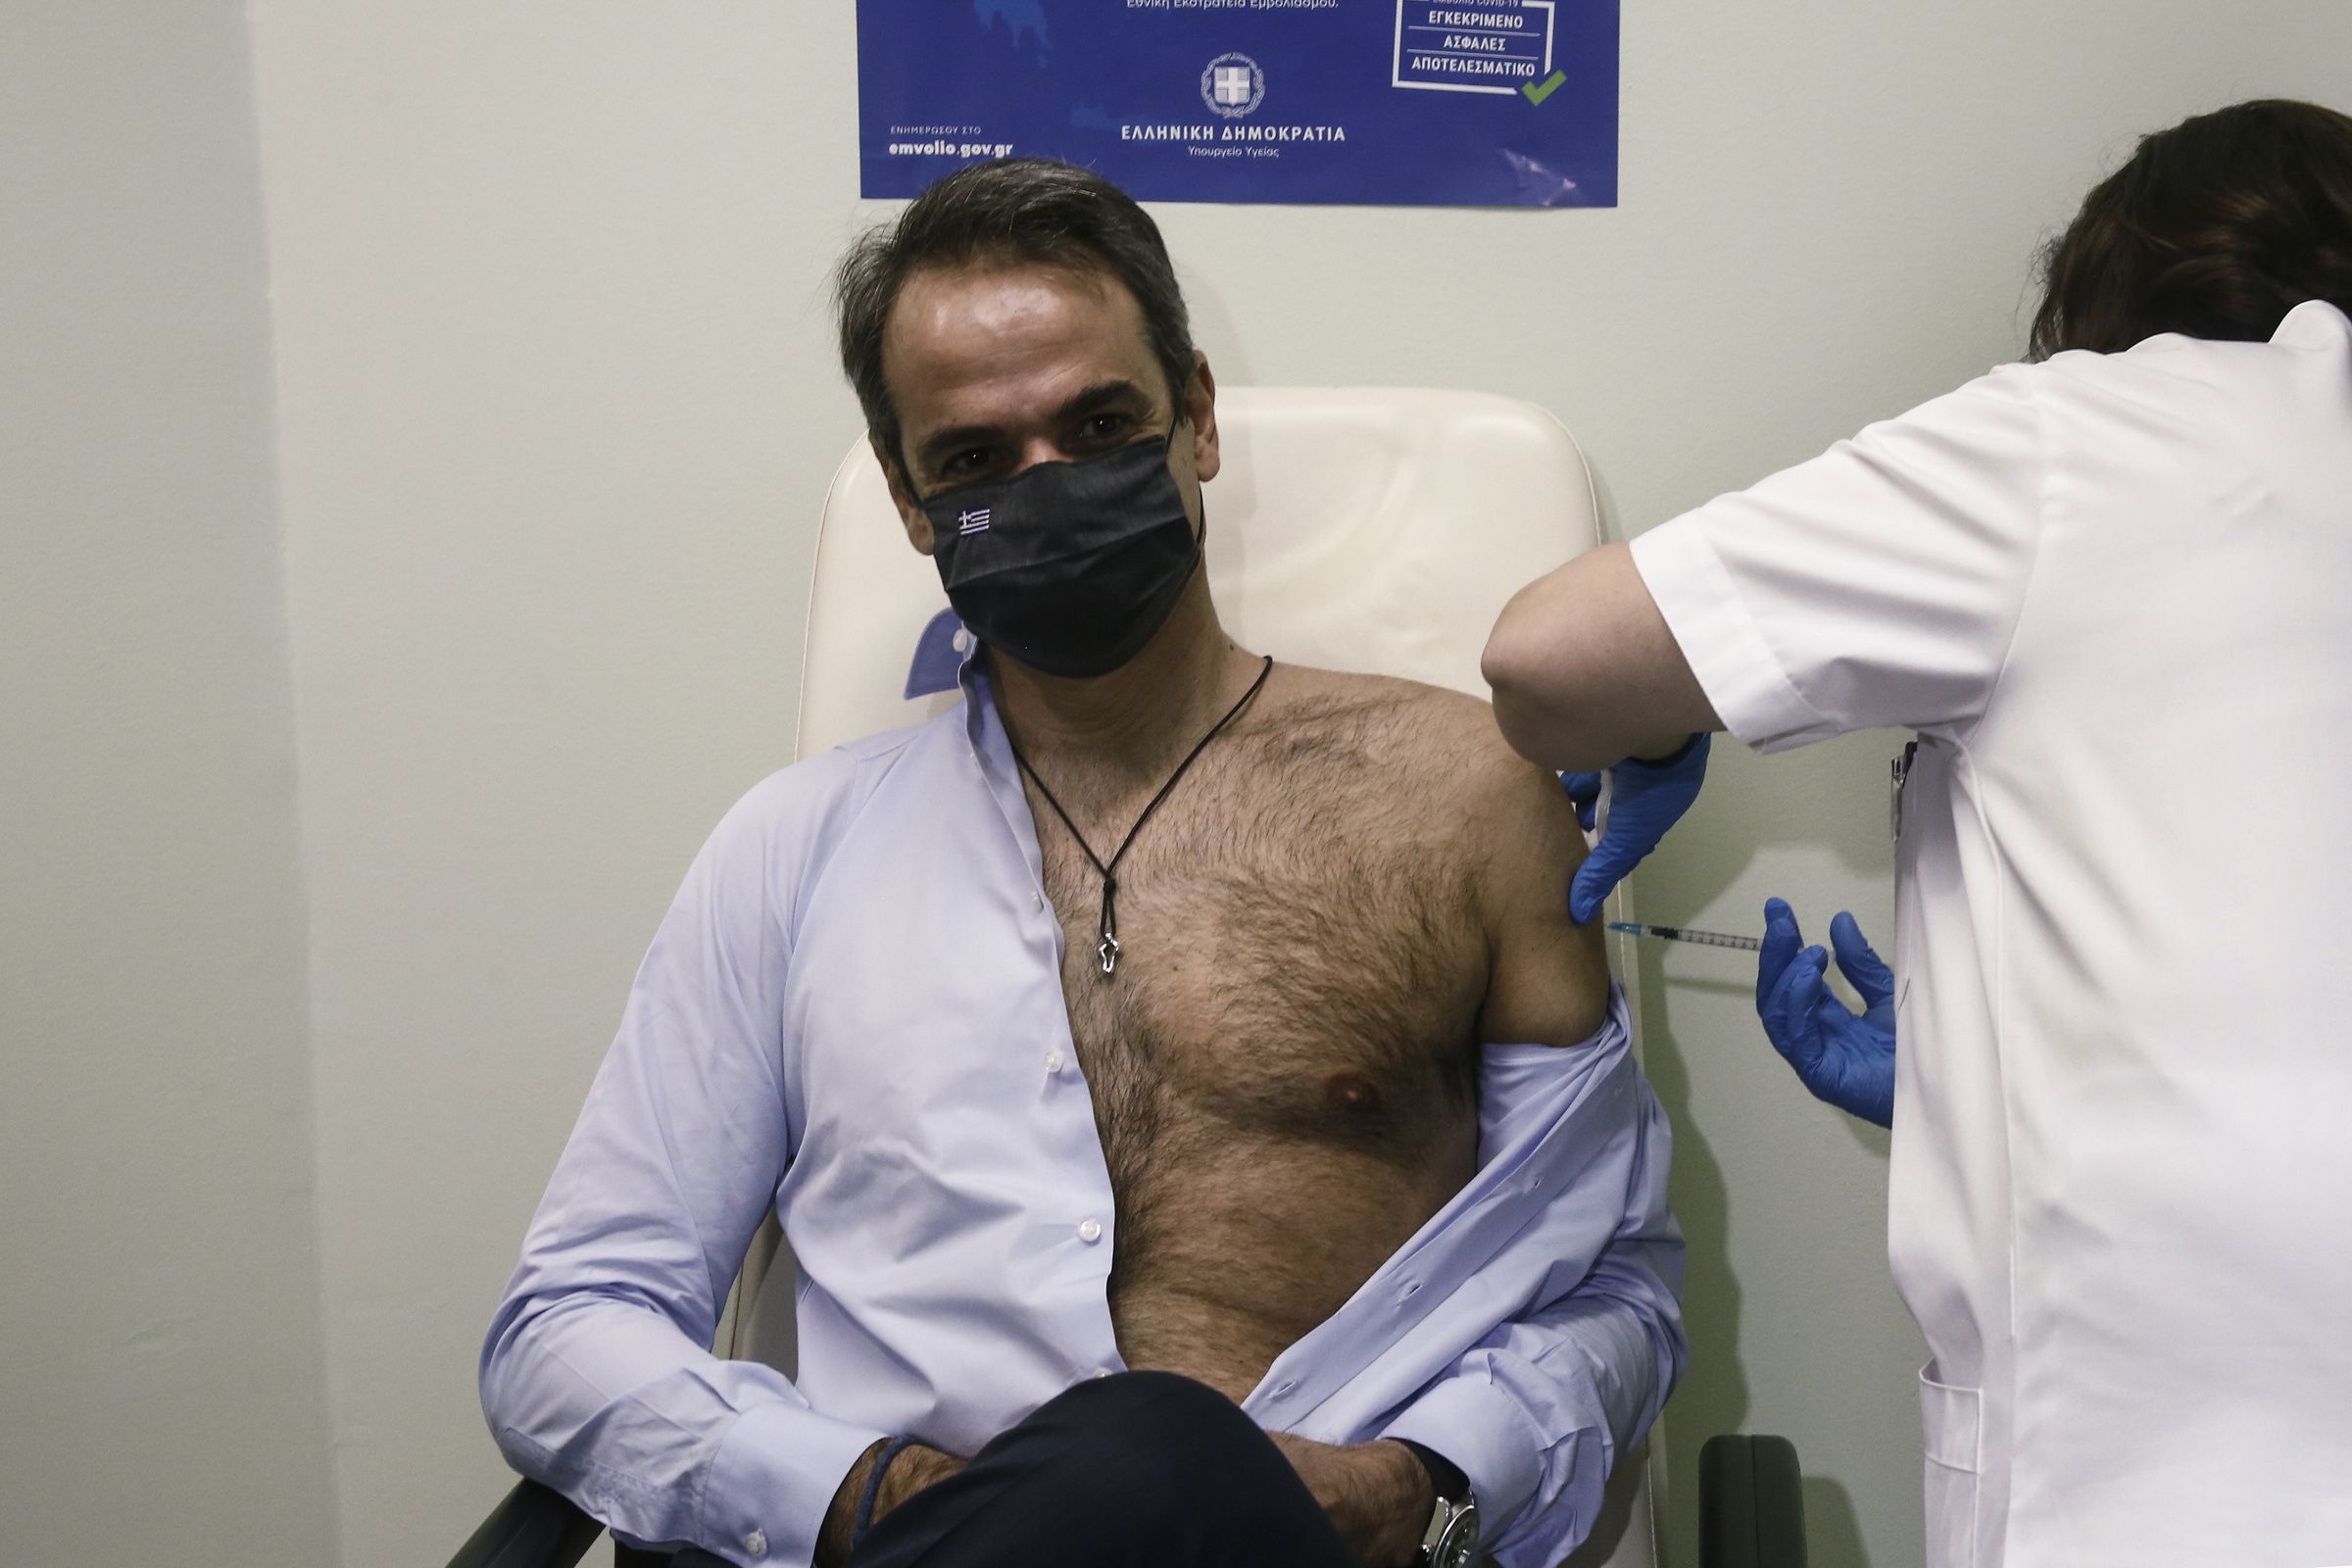 A man wearing a face mask sits in a chair with his shirt unbuttoned and half of his torso exposed as he gets the vaccine.